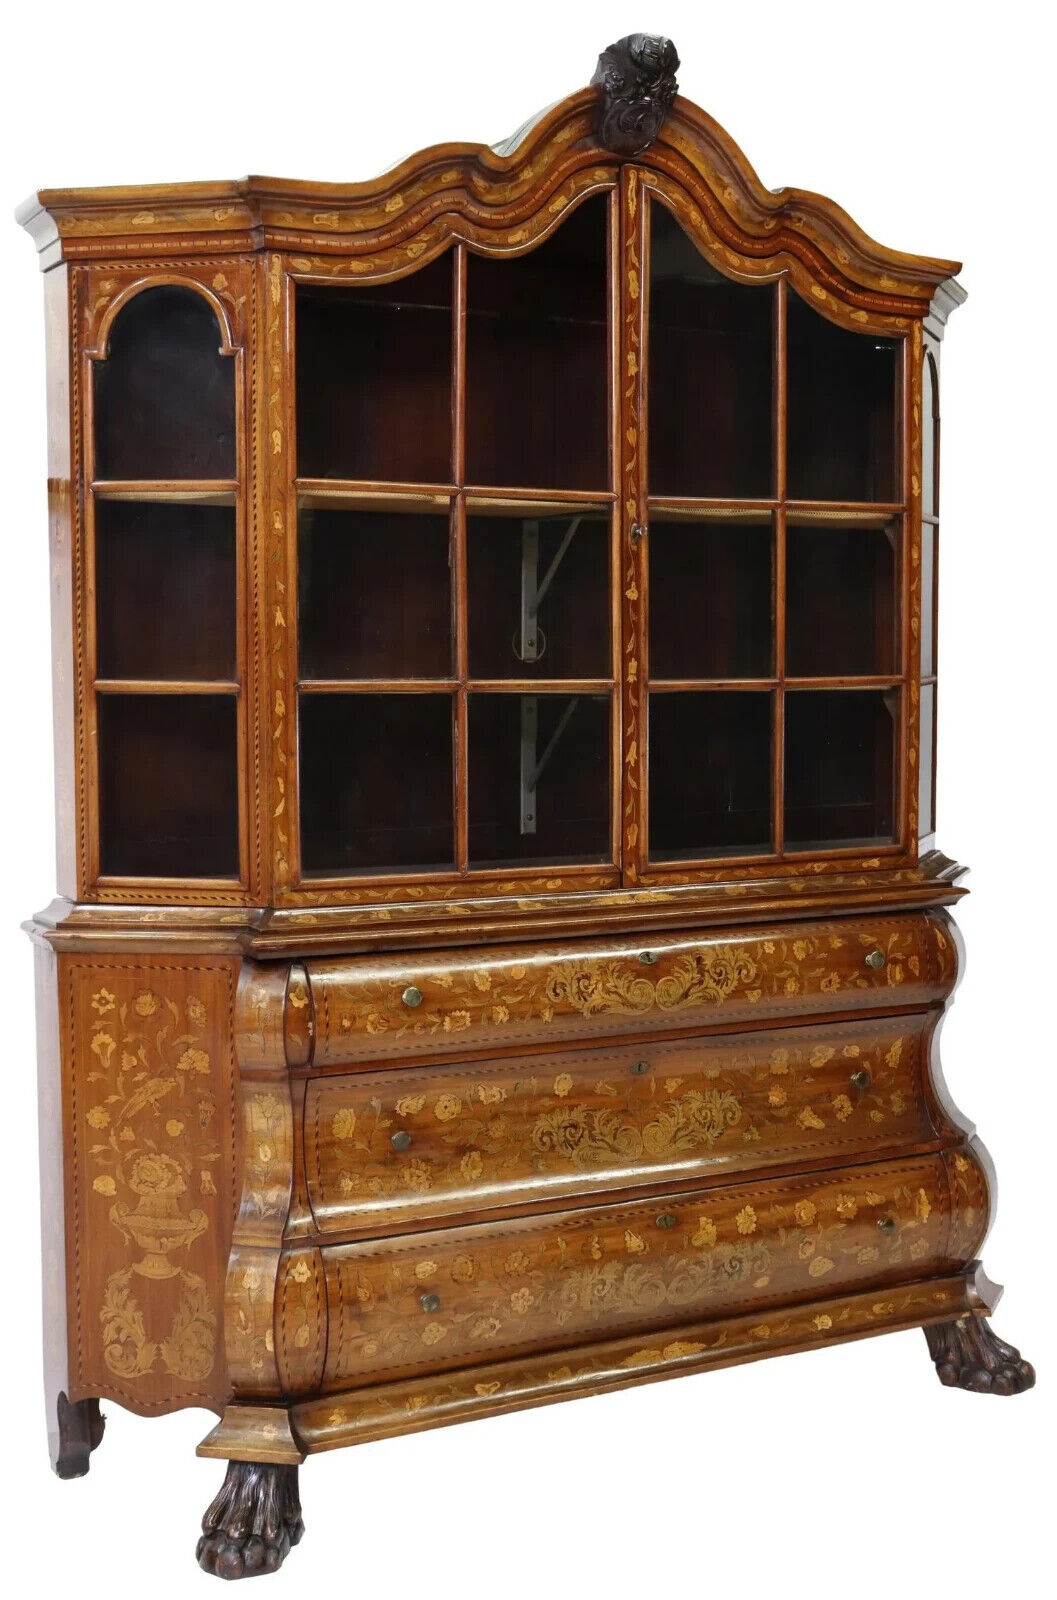 Antique Vitrine, On Chest, Dutch Marquetry, Inlaid, Display, 18th C, 1700s